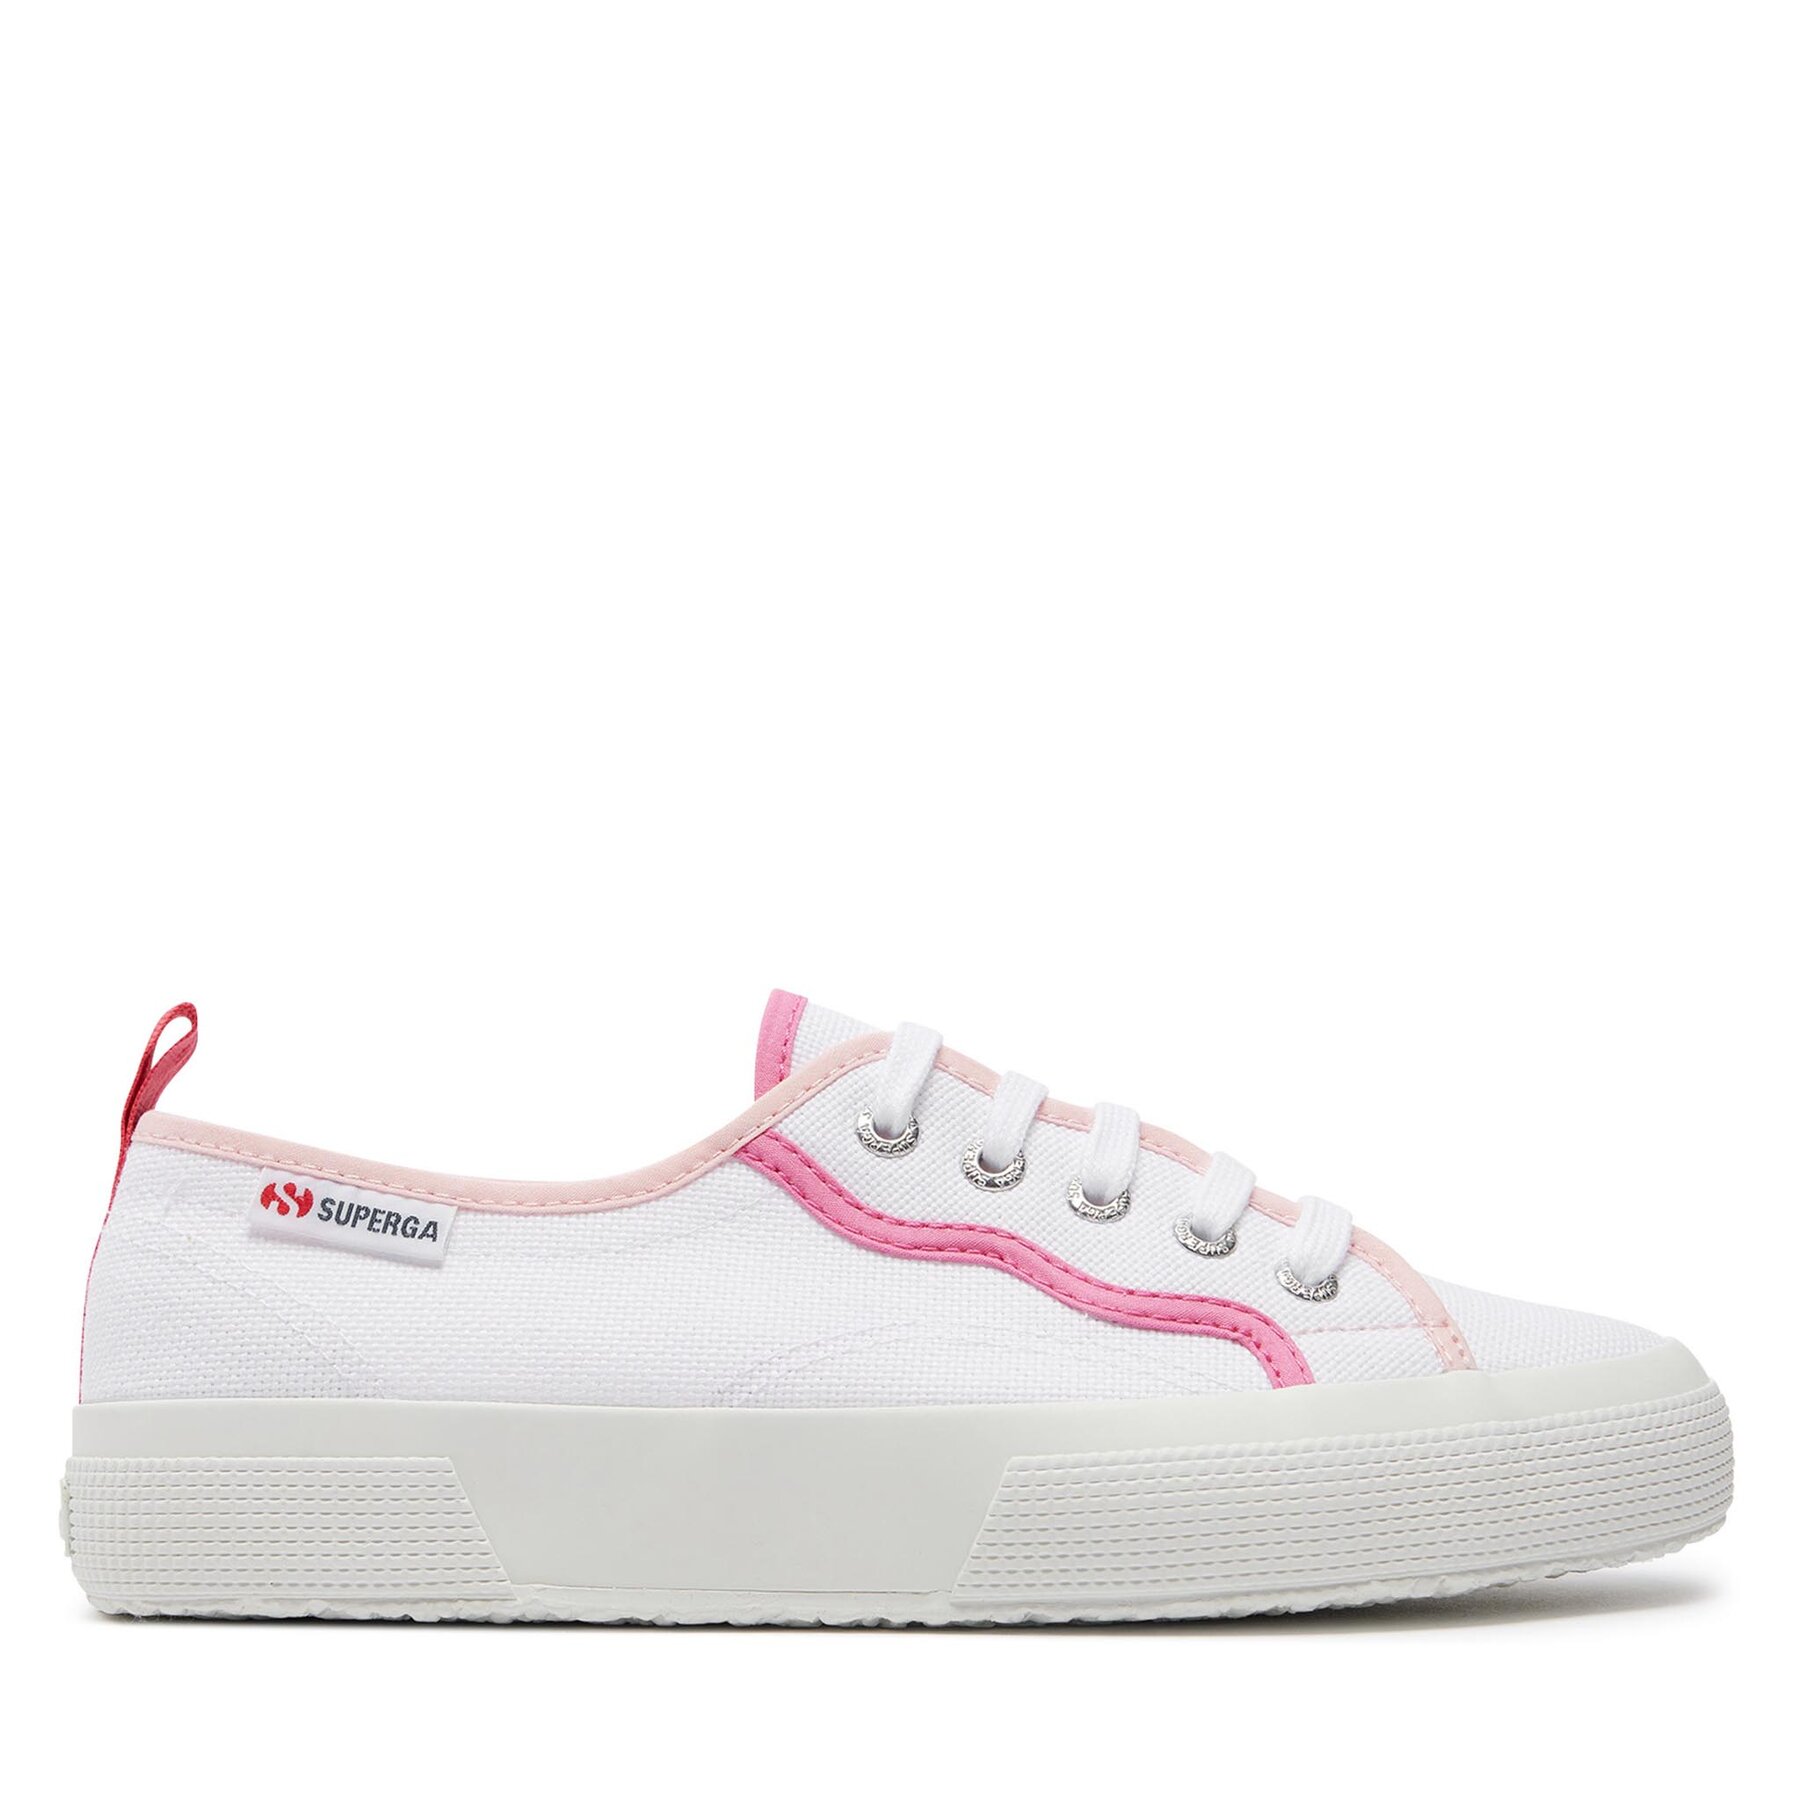 Sneakers Superga Curly Bindings 2750 S8138NW White-Shaded Pink ATG von Superga